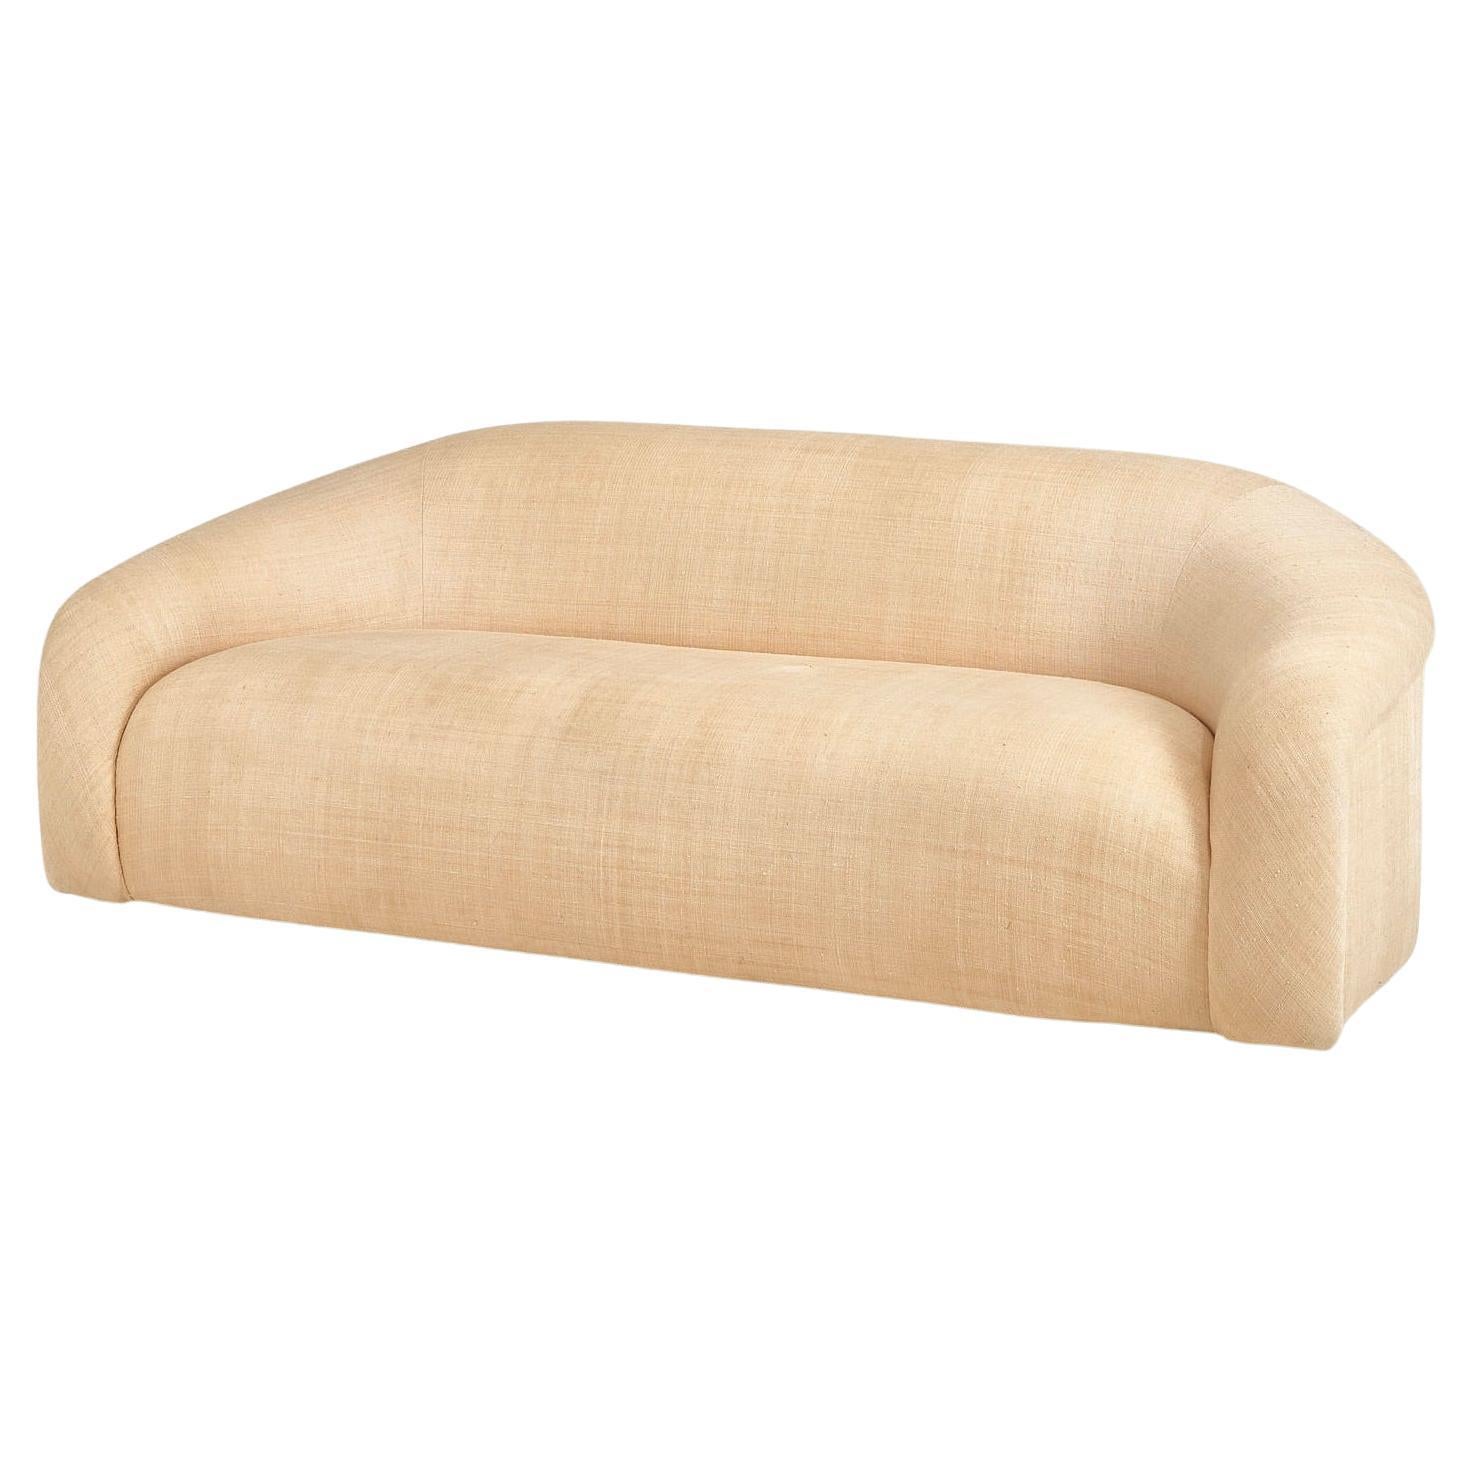 Organic Form Sofa by Preview, ca 1991